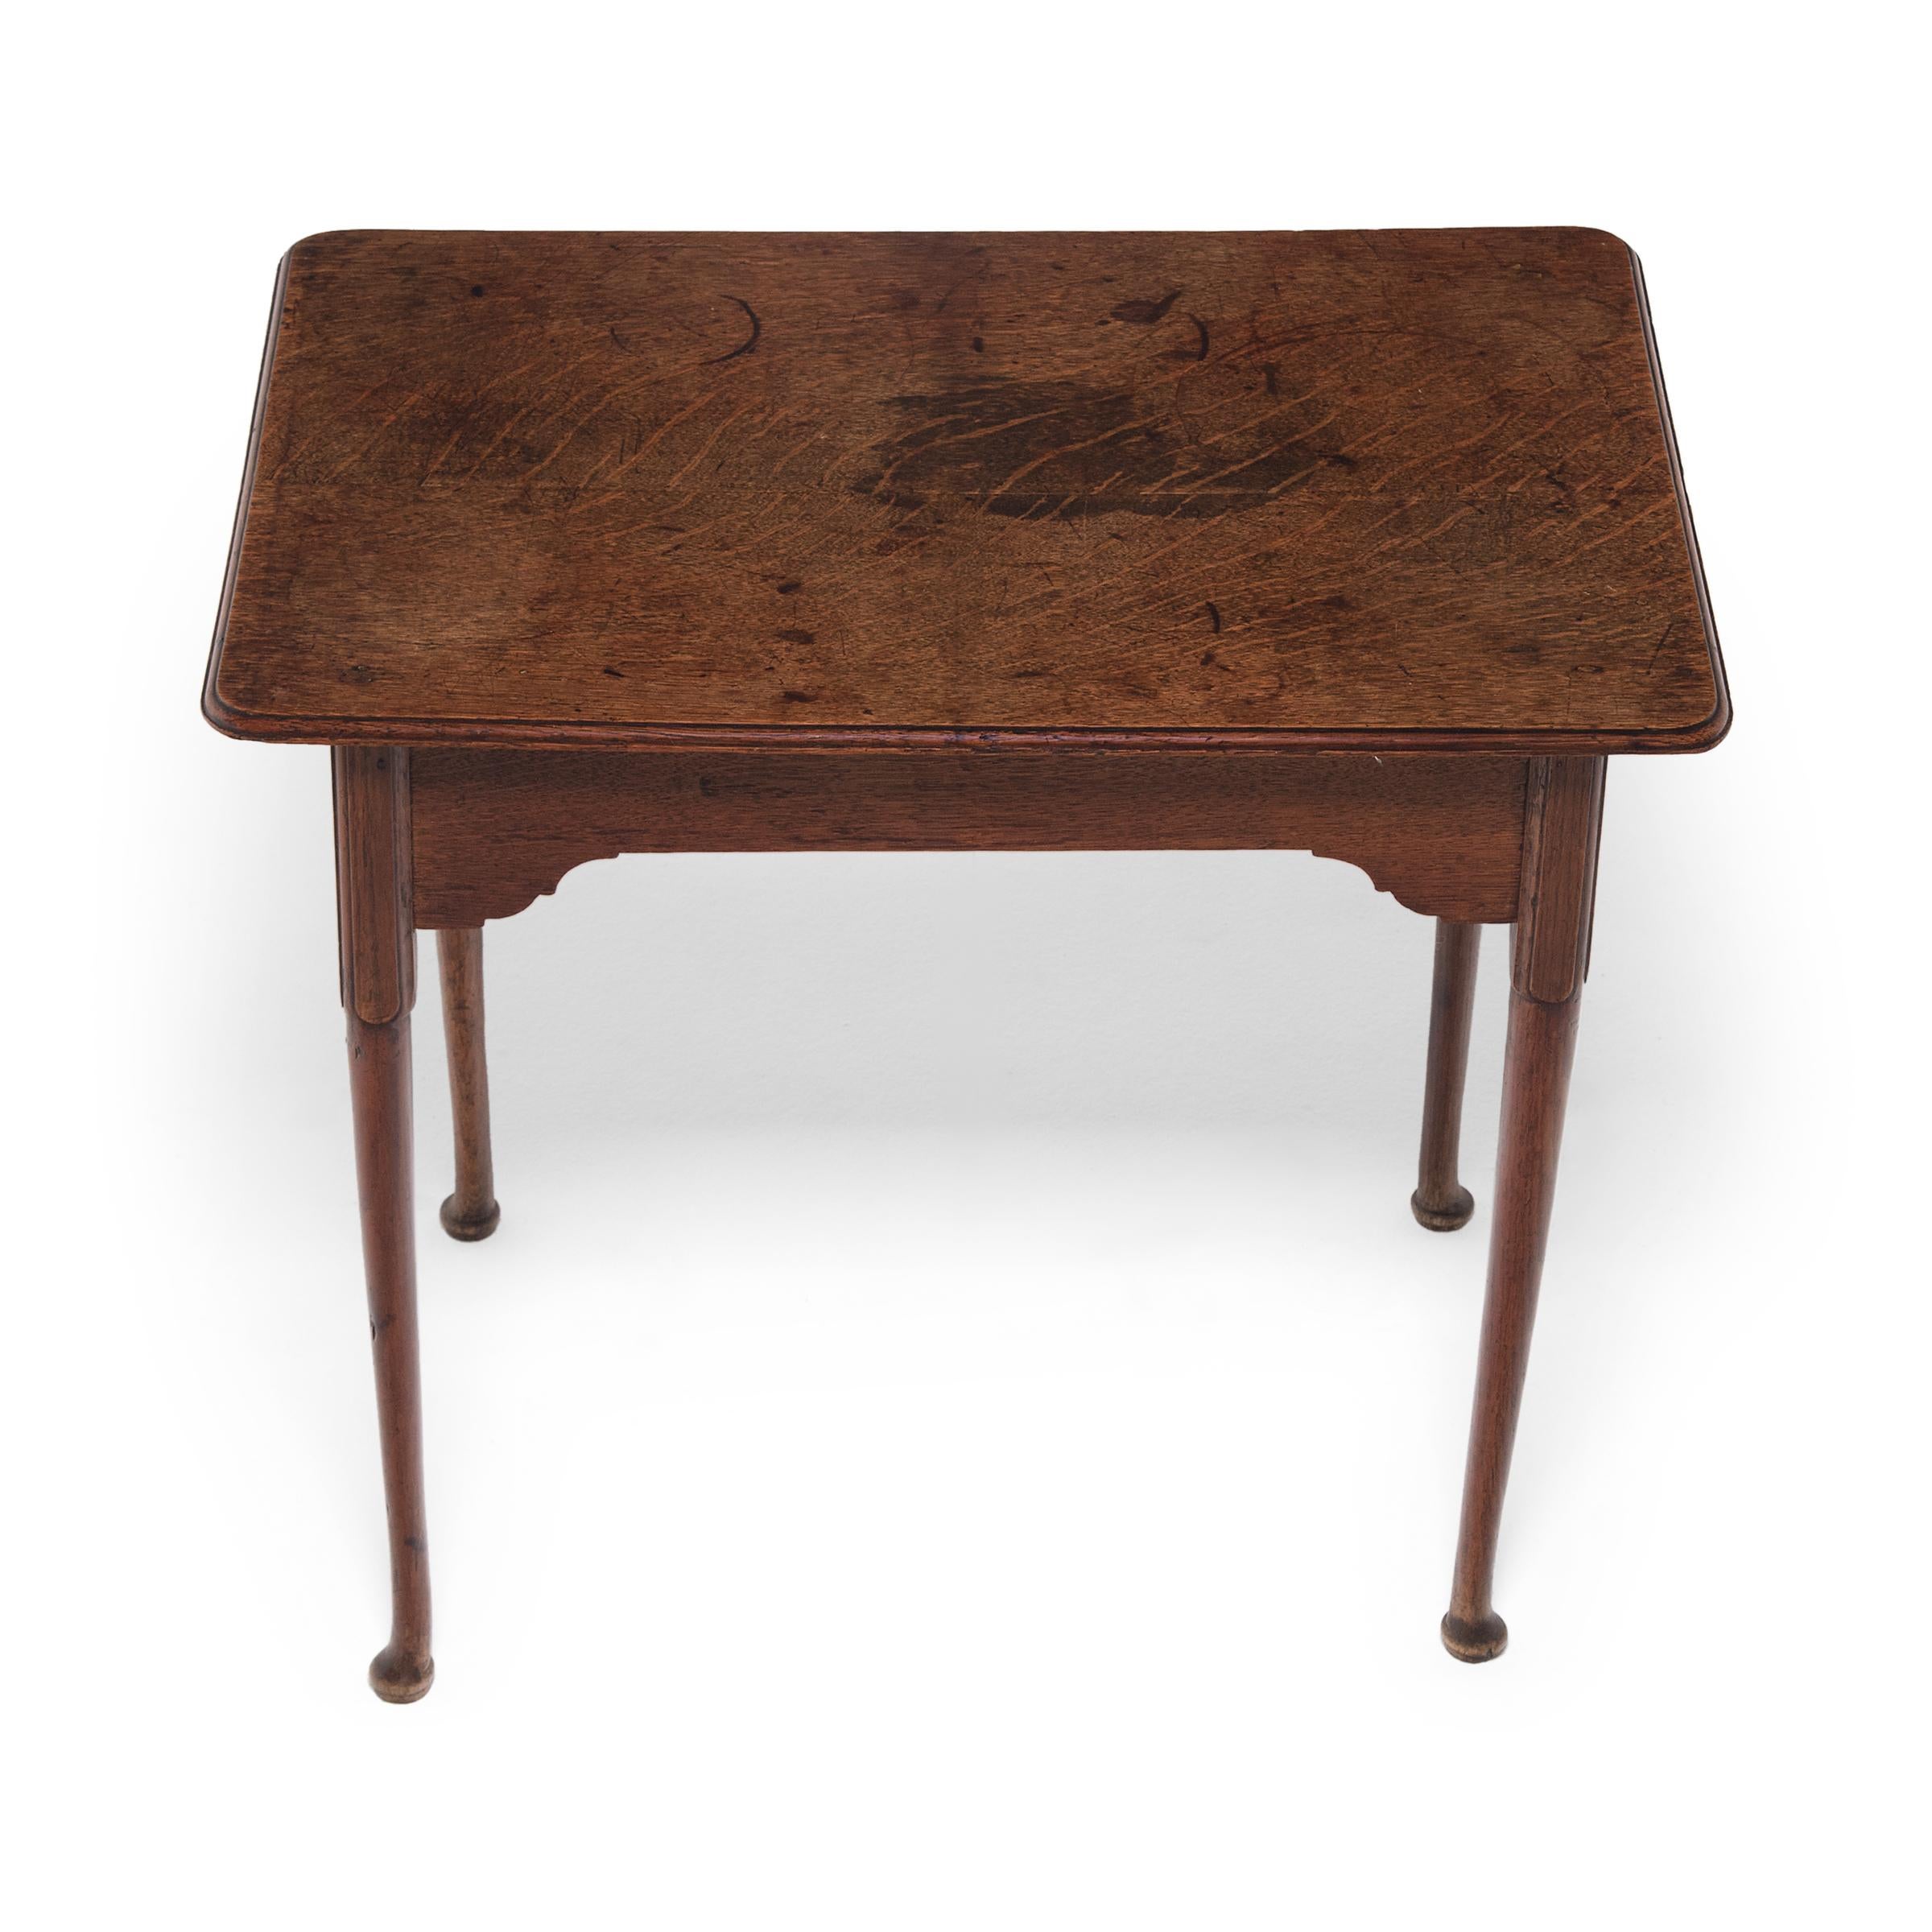 English Rectangular Side Table, c. 1850 In Good Condition For Sale In Chicago, IL